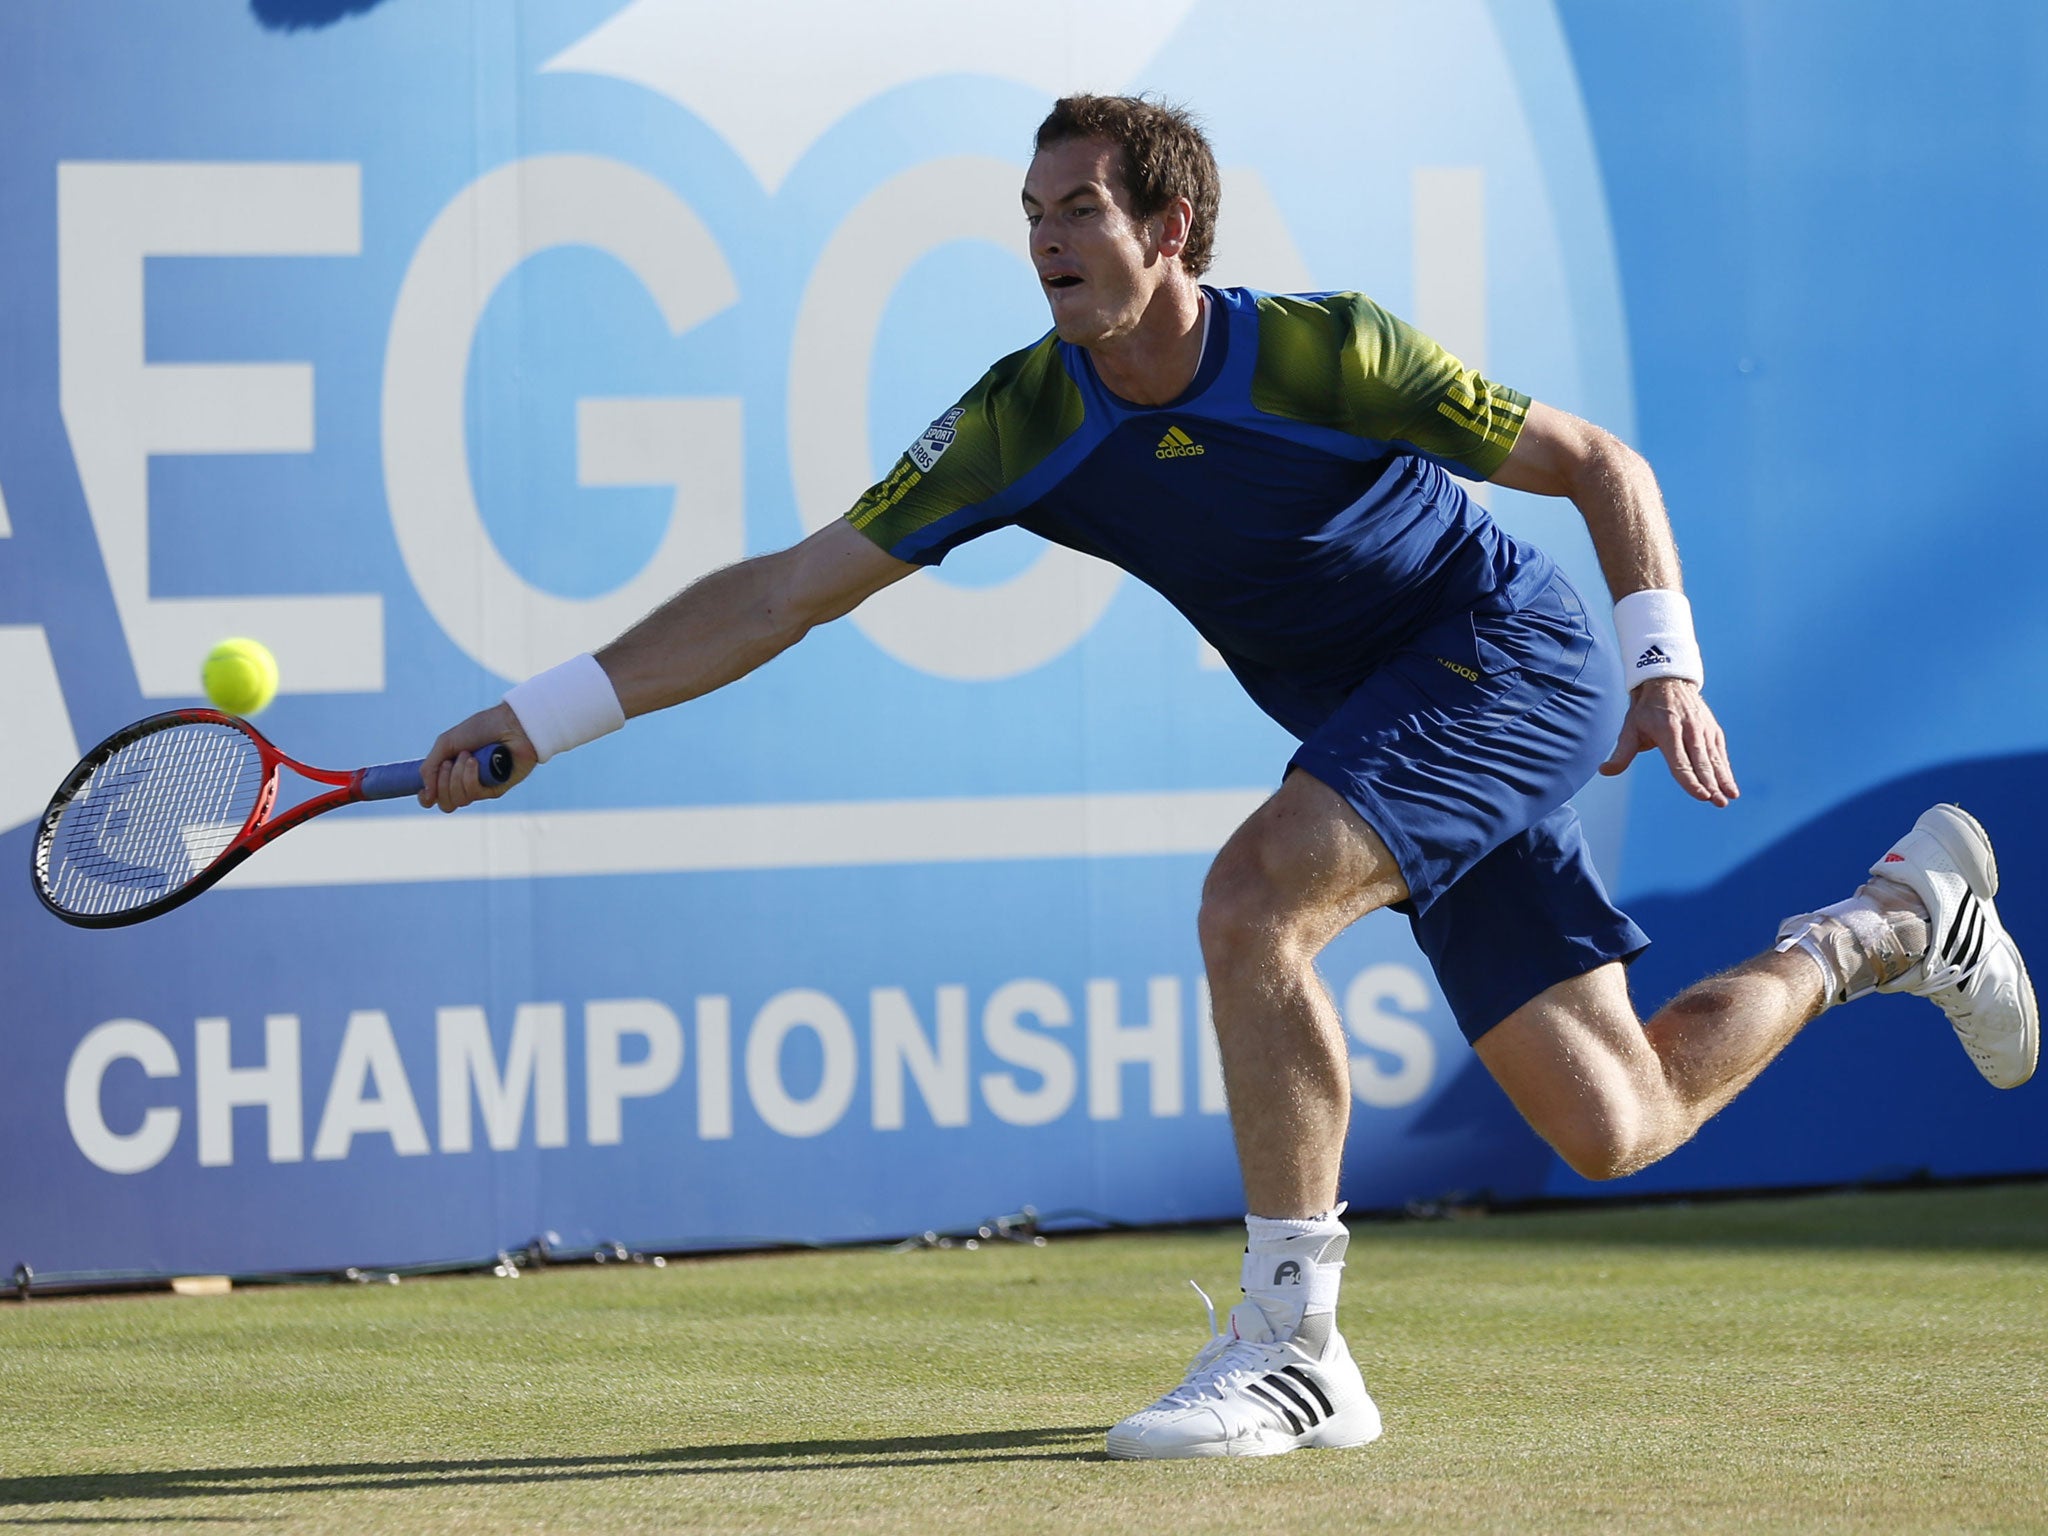 On song: Andy Murray reaches for a forehand against Jo-Wilfried Tsonga at the Queen's Club